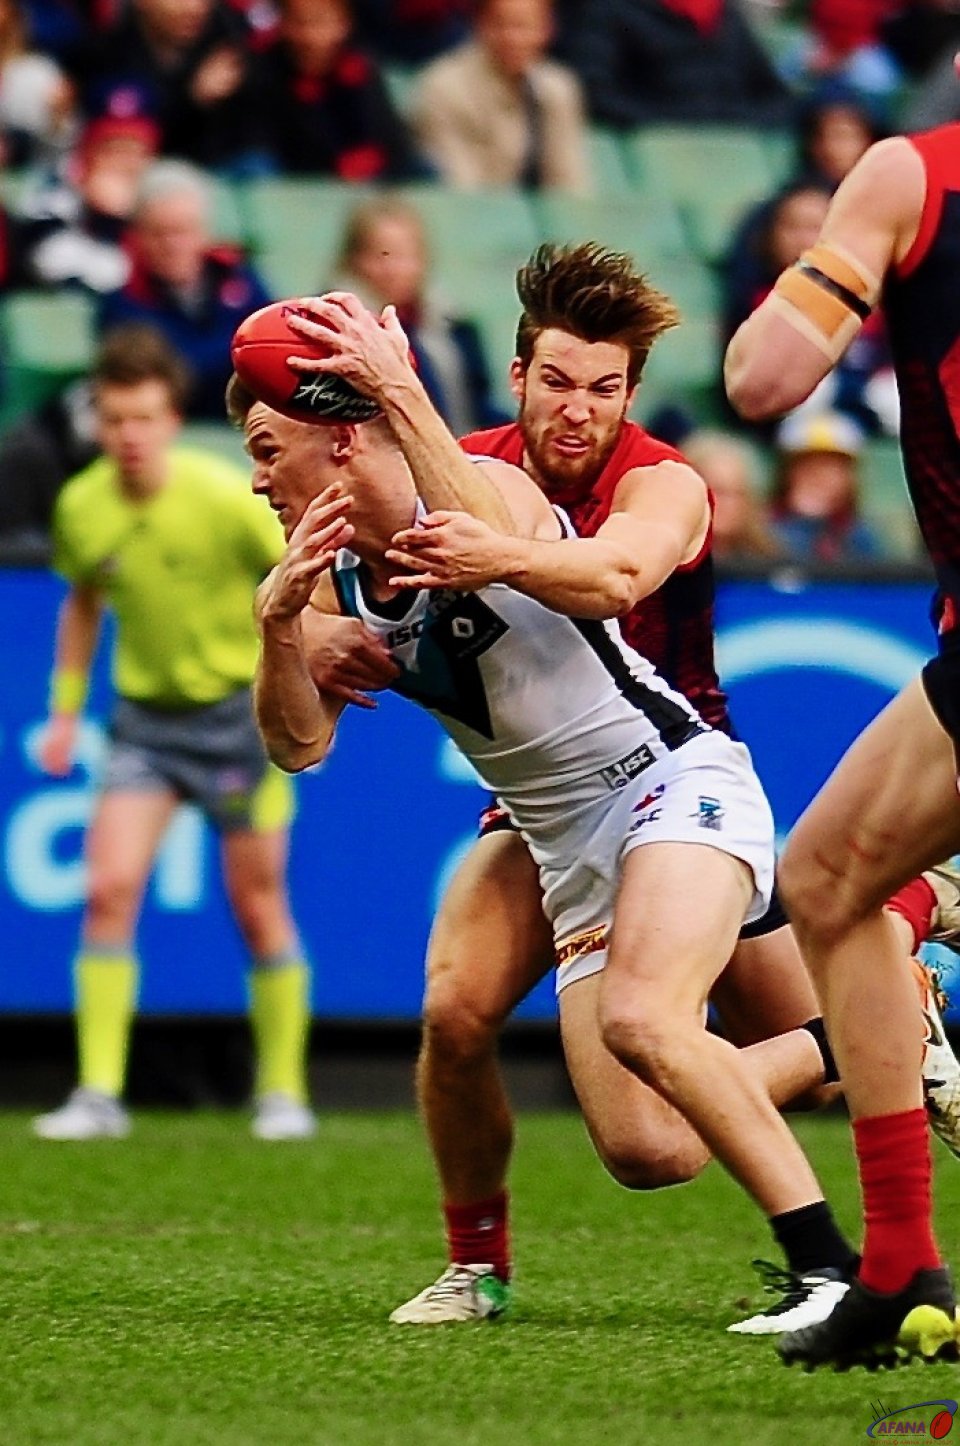 Robbie Gray gets tackled